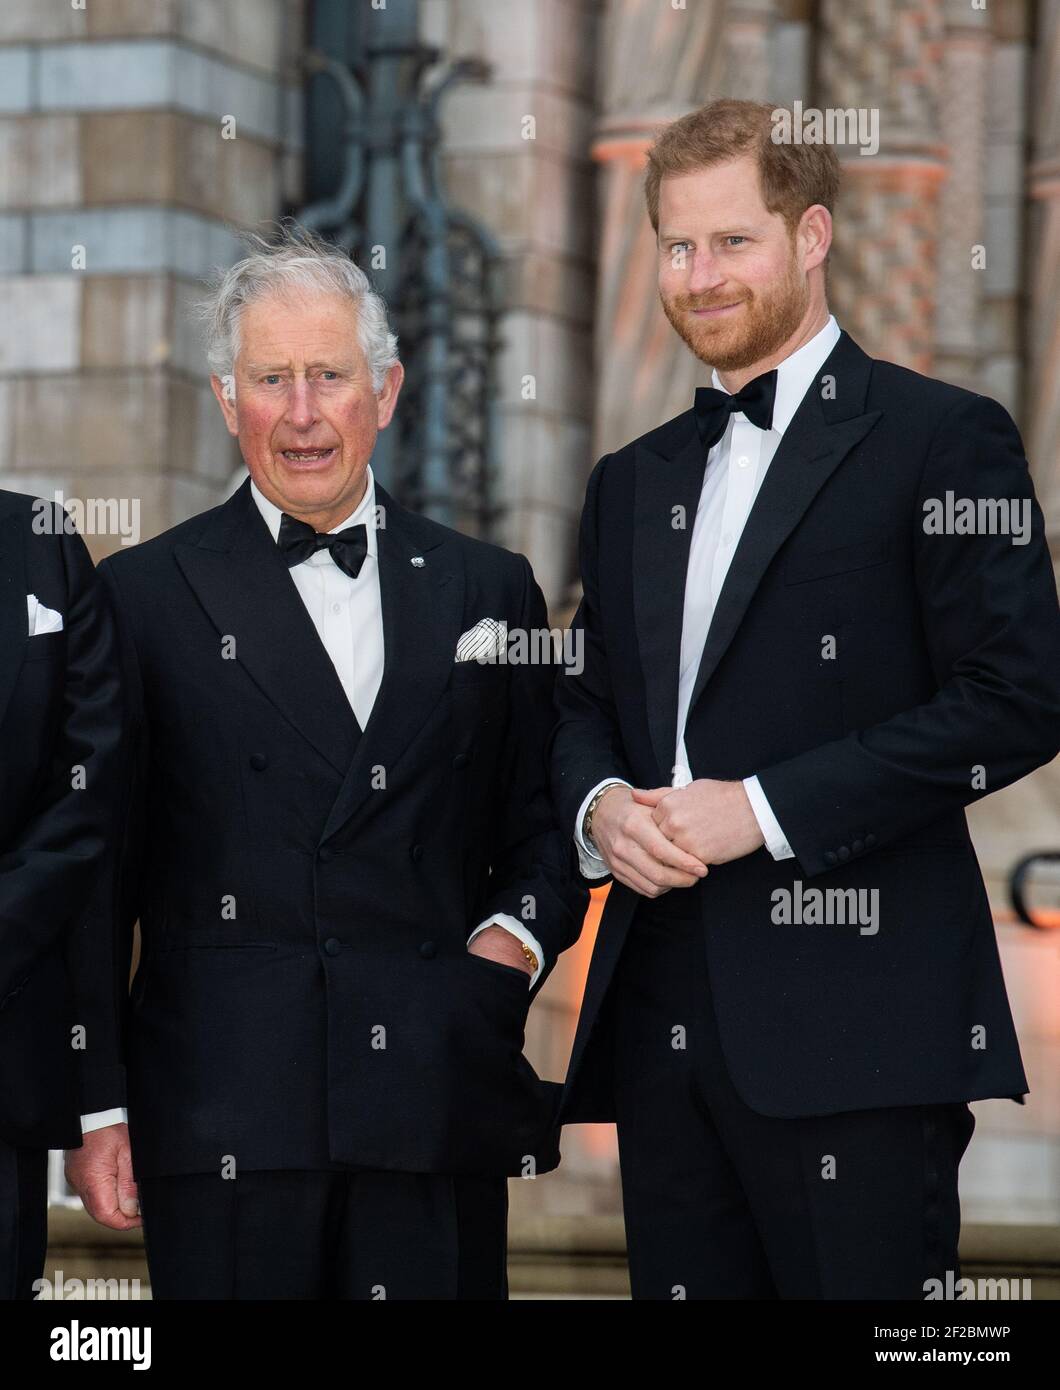 London, United Kingdom. 4th April 2019. Prince Charles, Prince Harry attending The World Premiere of the Netflix Television Series 'Our Planet' held at the Natural History Museum. Credit: Scott Garfitt /Alamy Live News Stock Photo